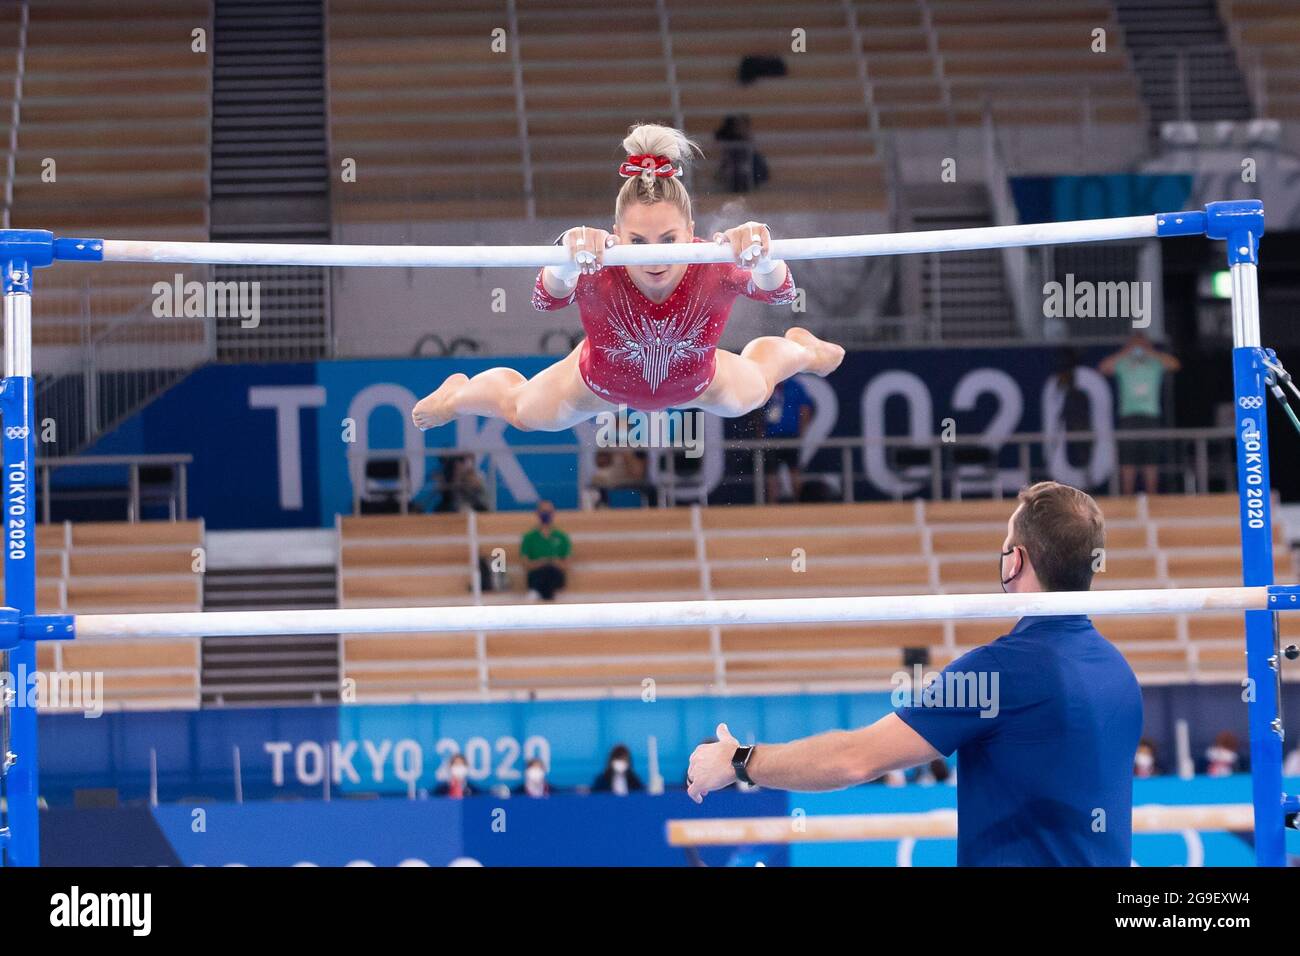 Tokyo, Japan. 25th July, 2021. Mykayla Skinner of United States (397) warms up for uneven bars during the Tokyo 2020 Olympic Games Women's Qualification at the Ariake Gymnastics Centre in Tokyo, Japan. Daniel Lea/CSM}. Credit: csm/Alamy Live News Stock Photo